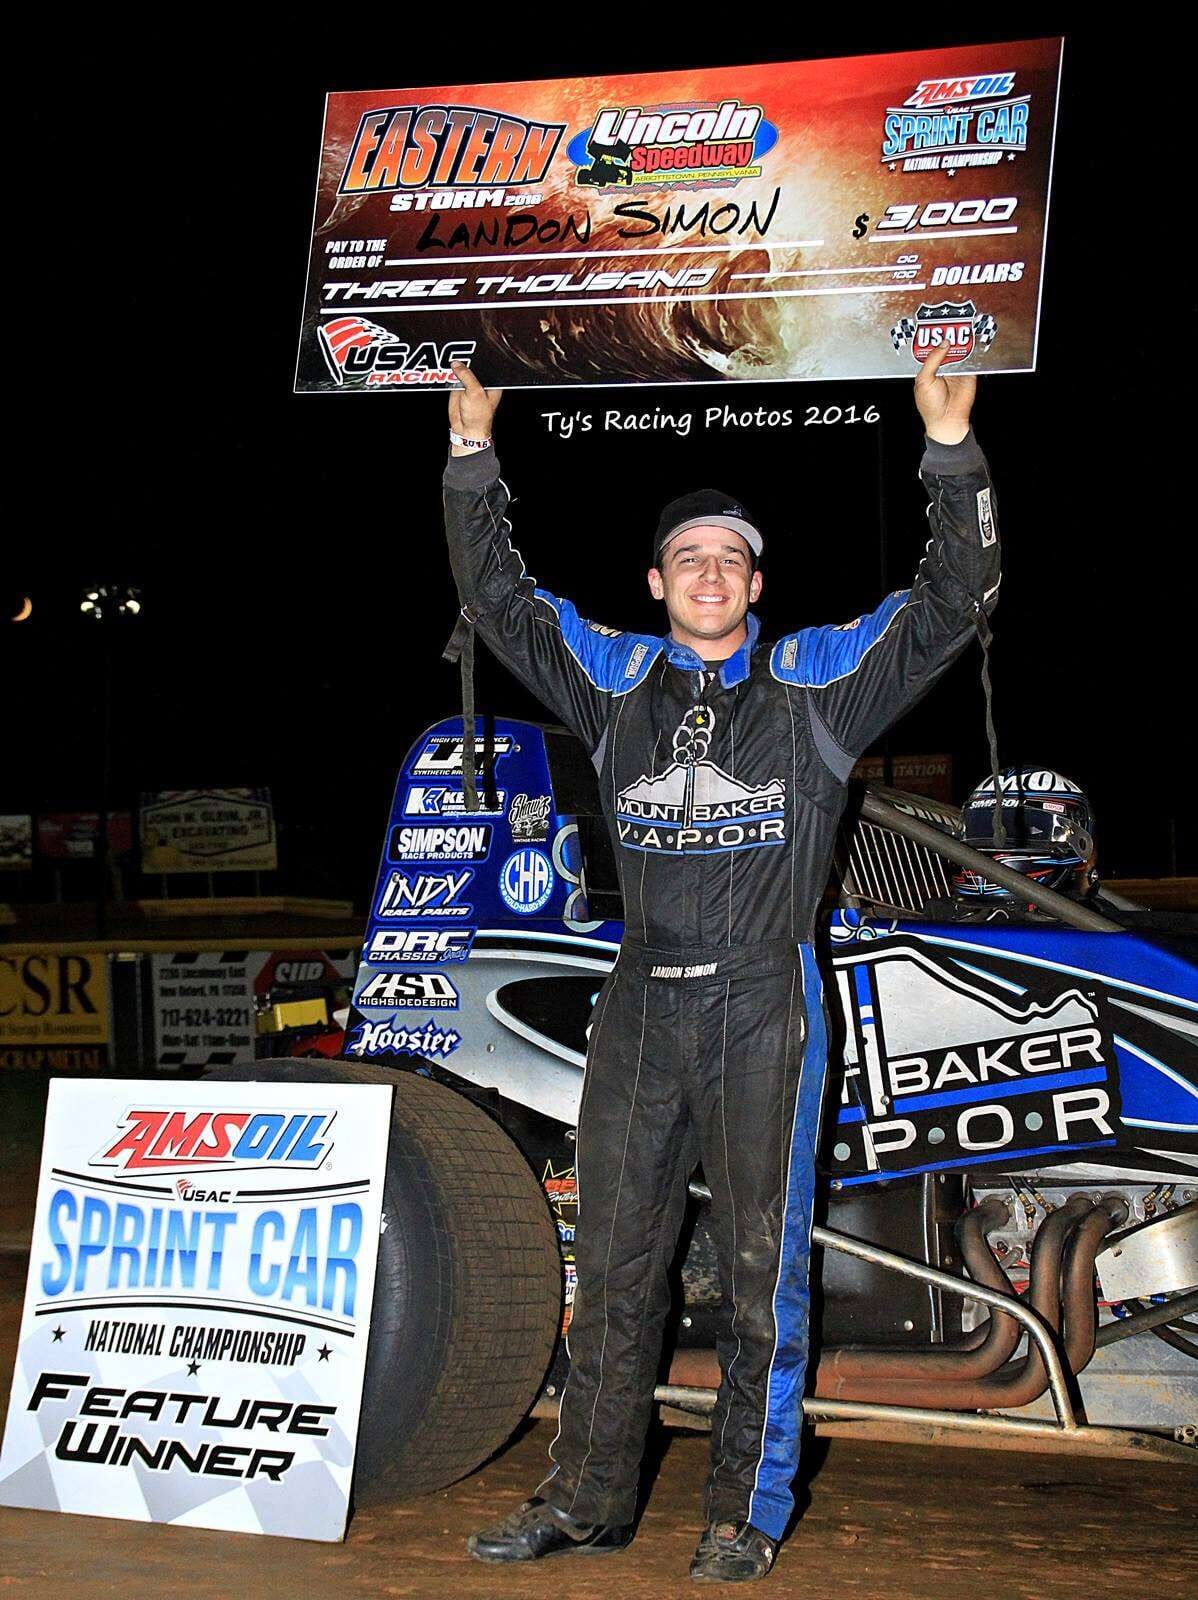 simon-scores-in-lincoln-usac-sprint-special-event